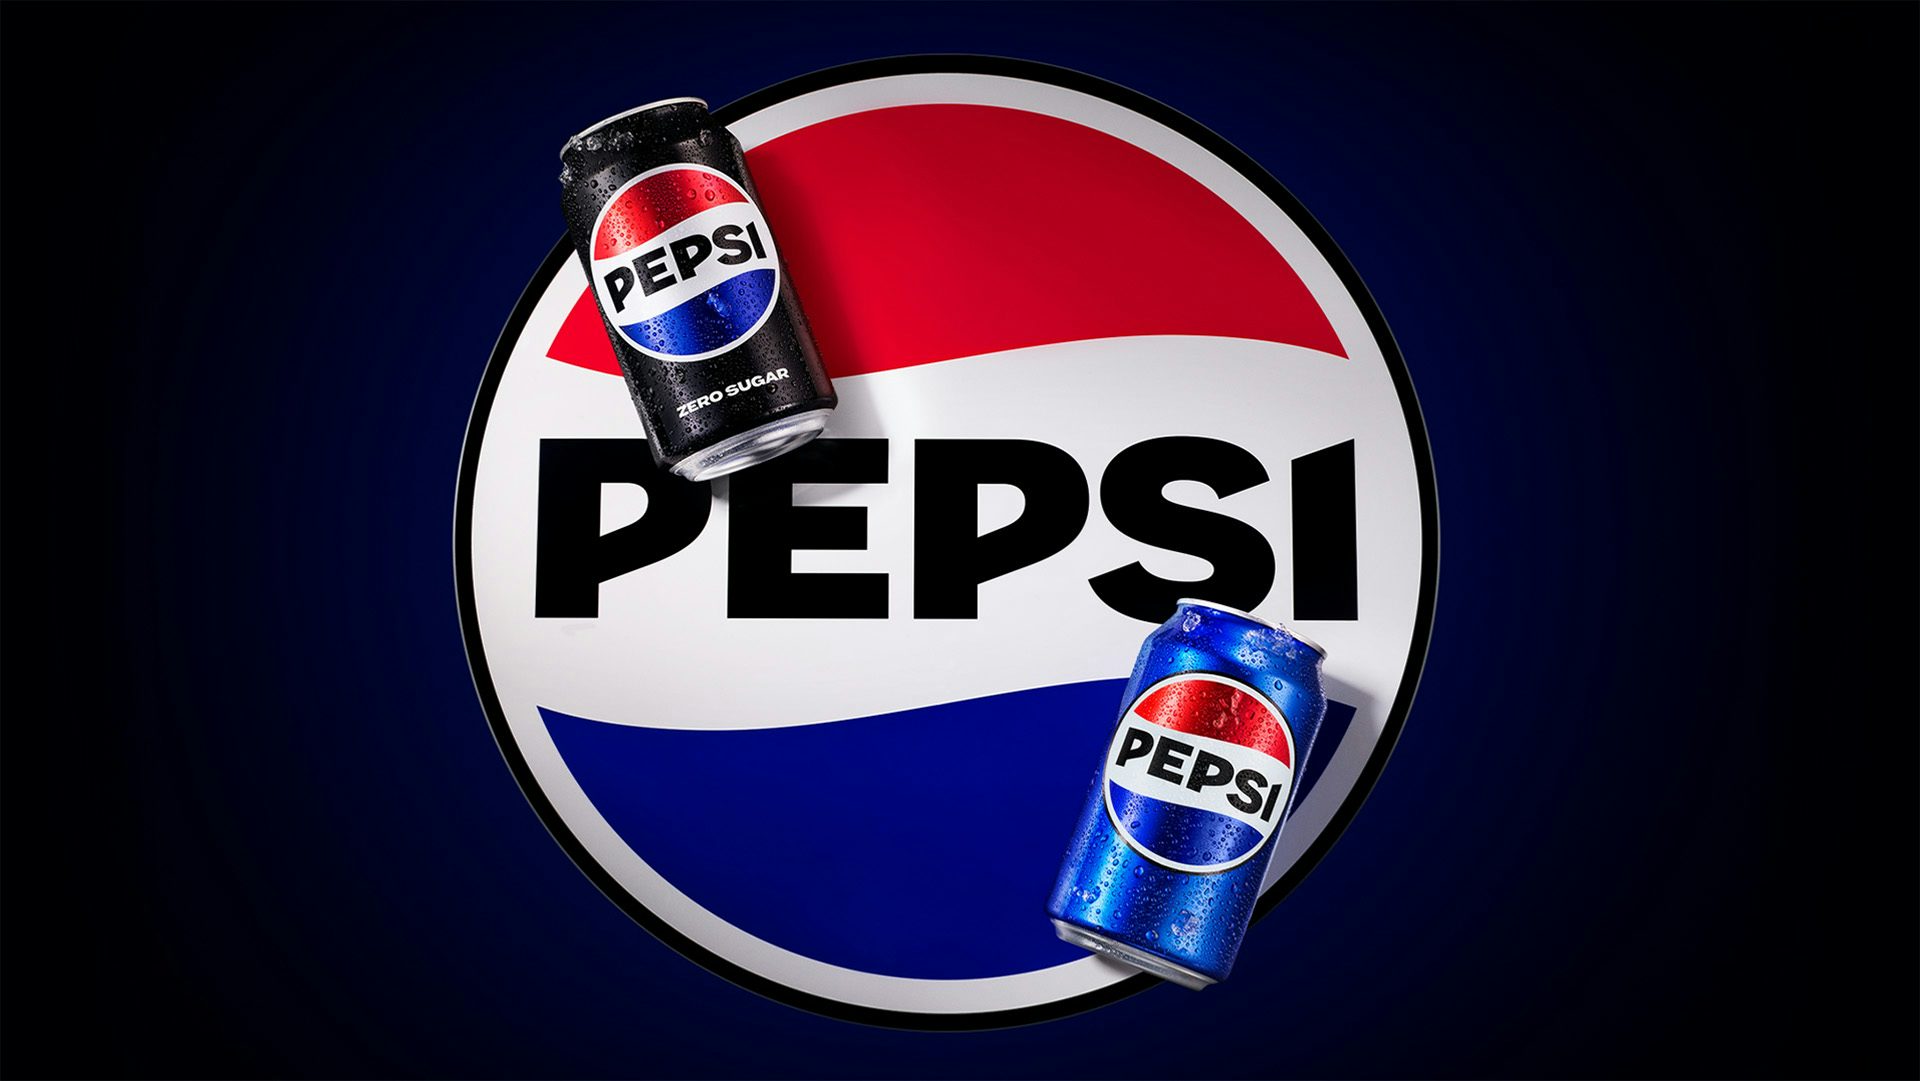 Graphic shows the new Pepsi branding on the background with two cans over the top